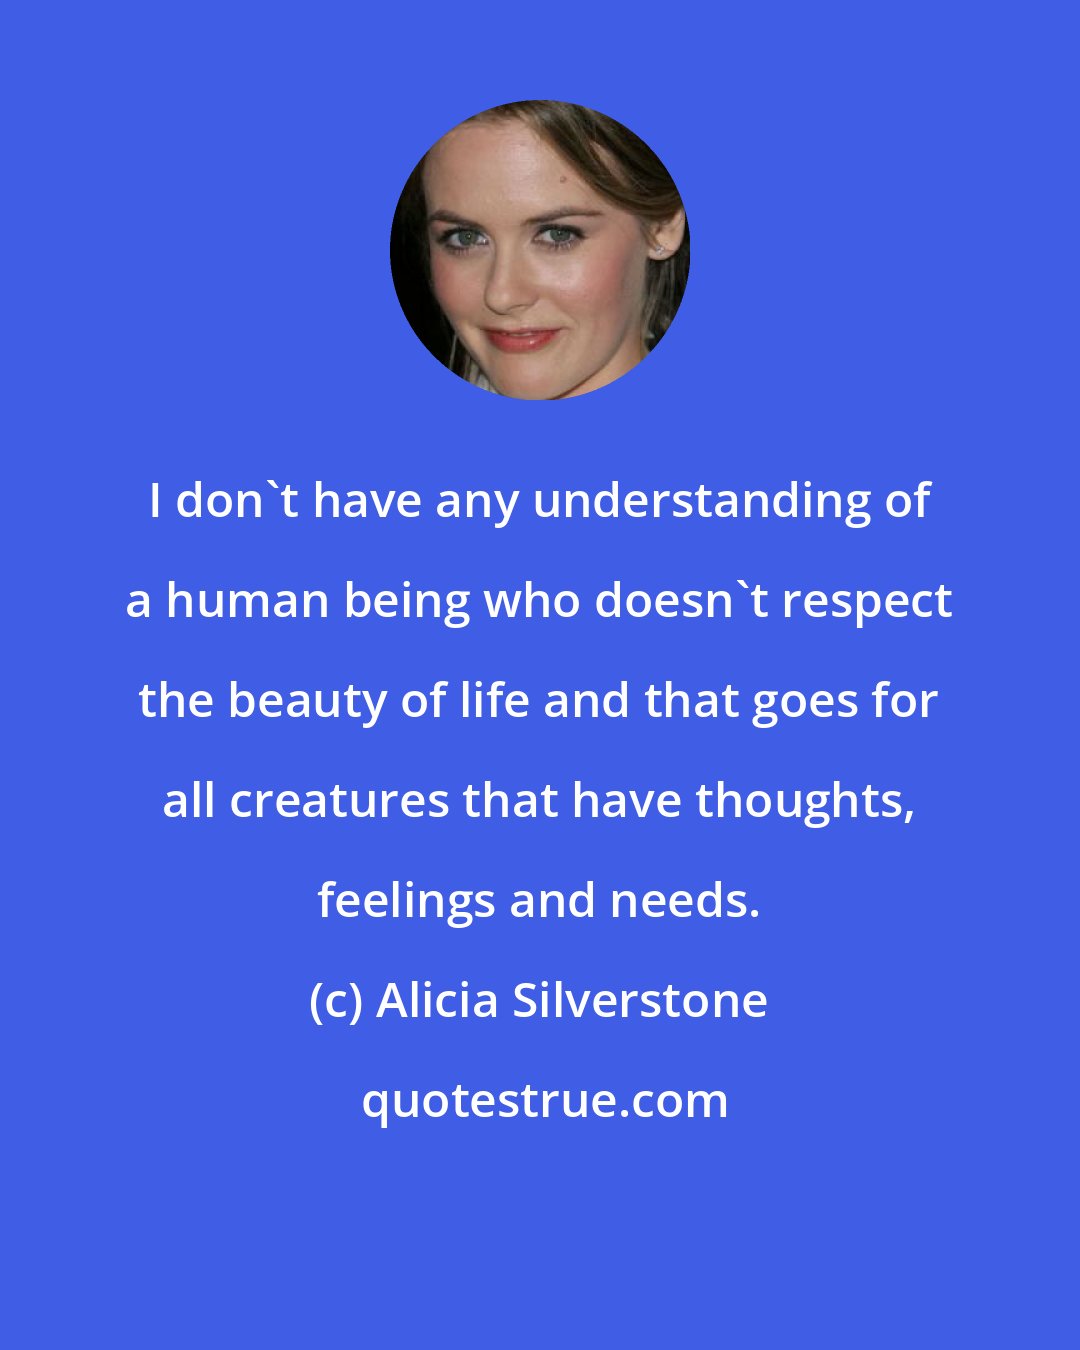 Alicia Silverstone: I don't have any understanding of a human being who doesn't respect the beauty of life and that goes for all creatures that have thoughts, feelings and needs.